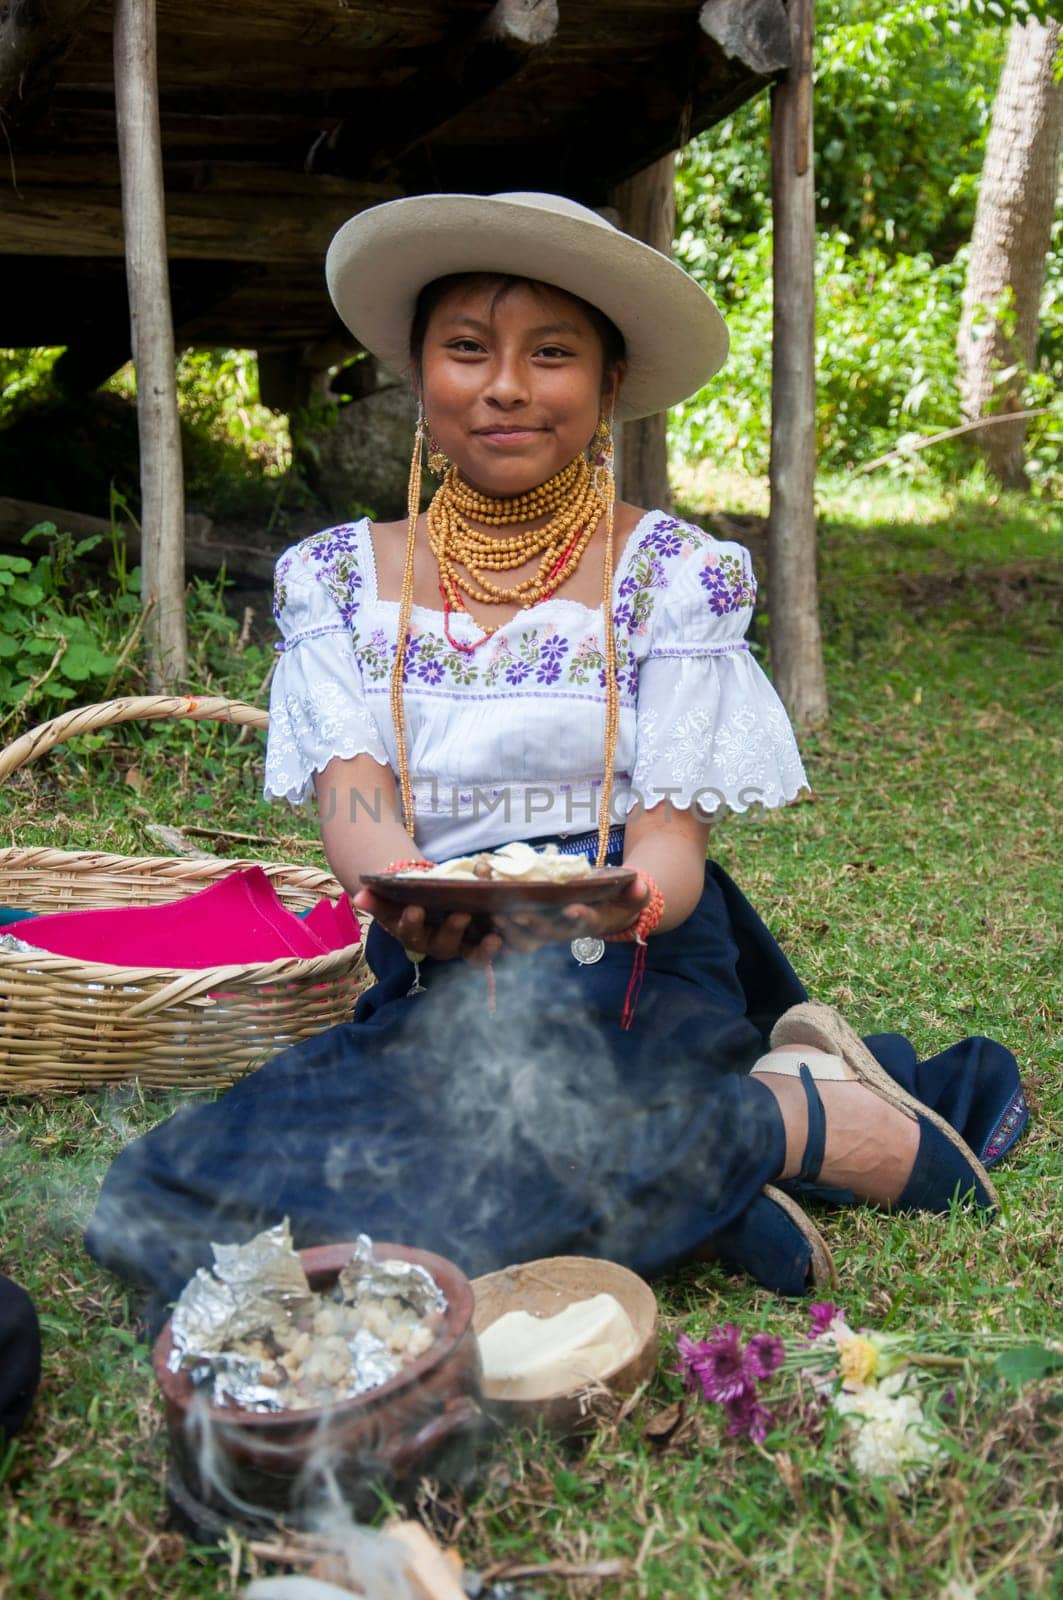 Chow Time with a Native Lady: Indigenous Gal Hangin' by Her Wooden Shack, Showin' Off Her Real Deal Traditional Grub and Some Smoke Show on the Side. High quality photo